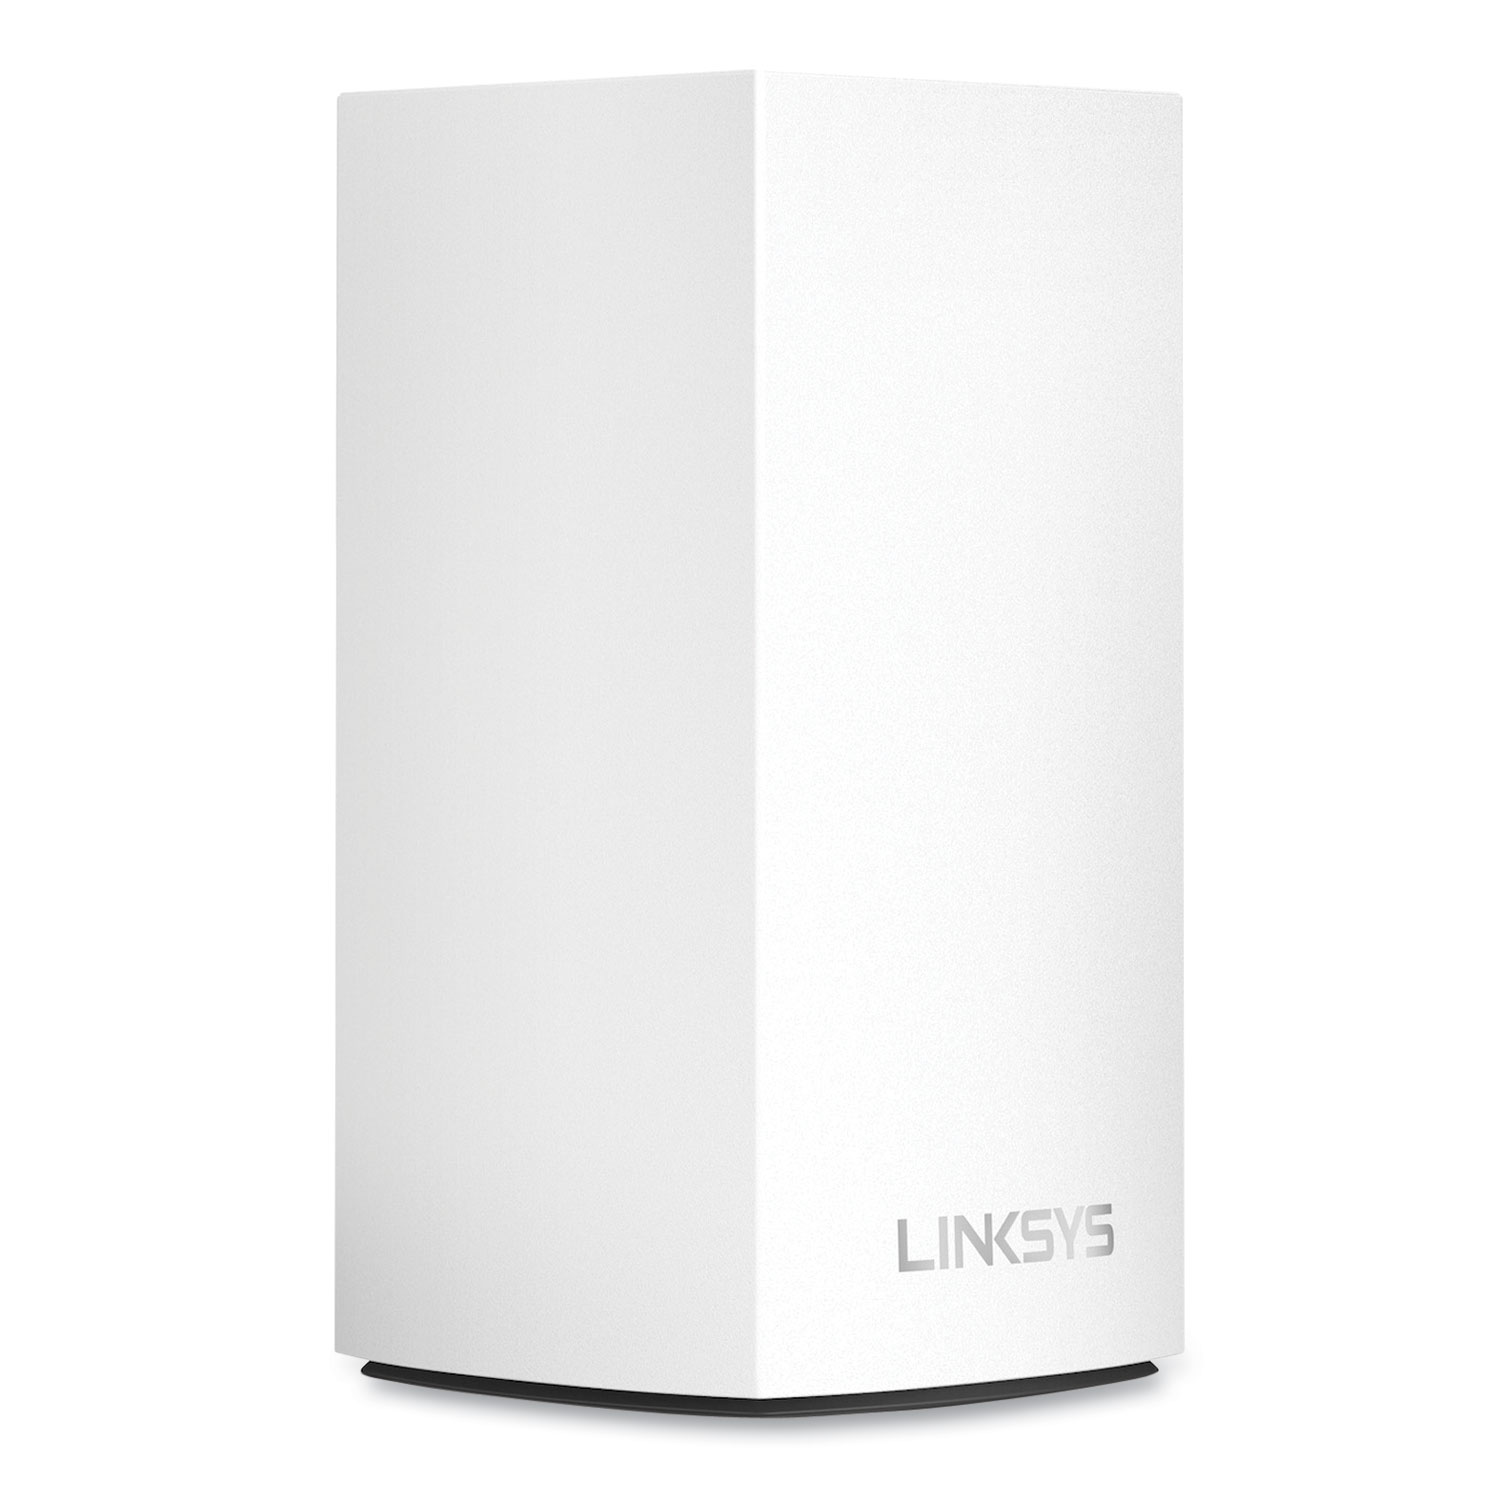  LINKSYS WHW0102 VELOP AC2600 Whole Home Mesh WiFi Dual Band, 1 Port, 2.4GHz/5GHz (LNKWHW0102) 